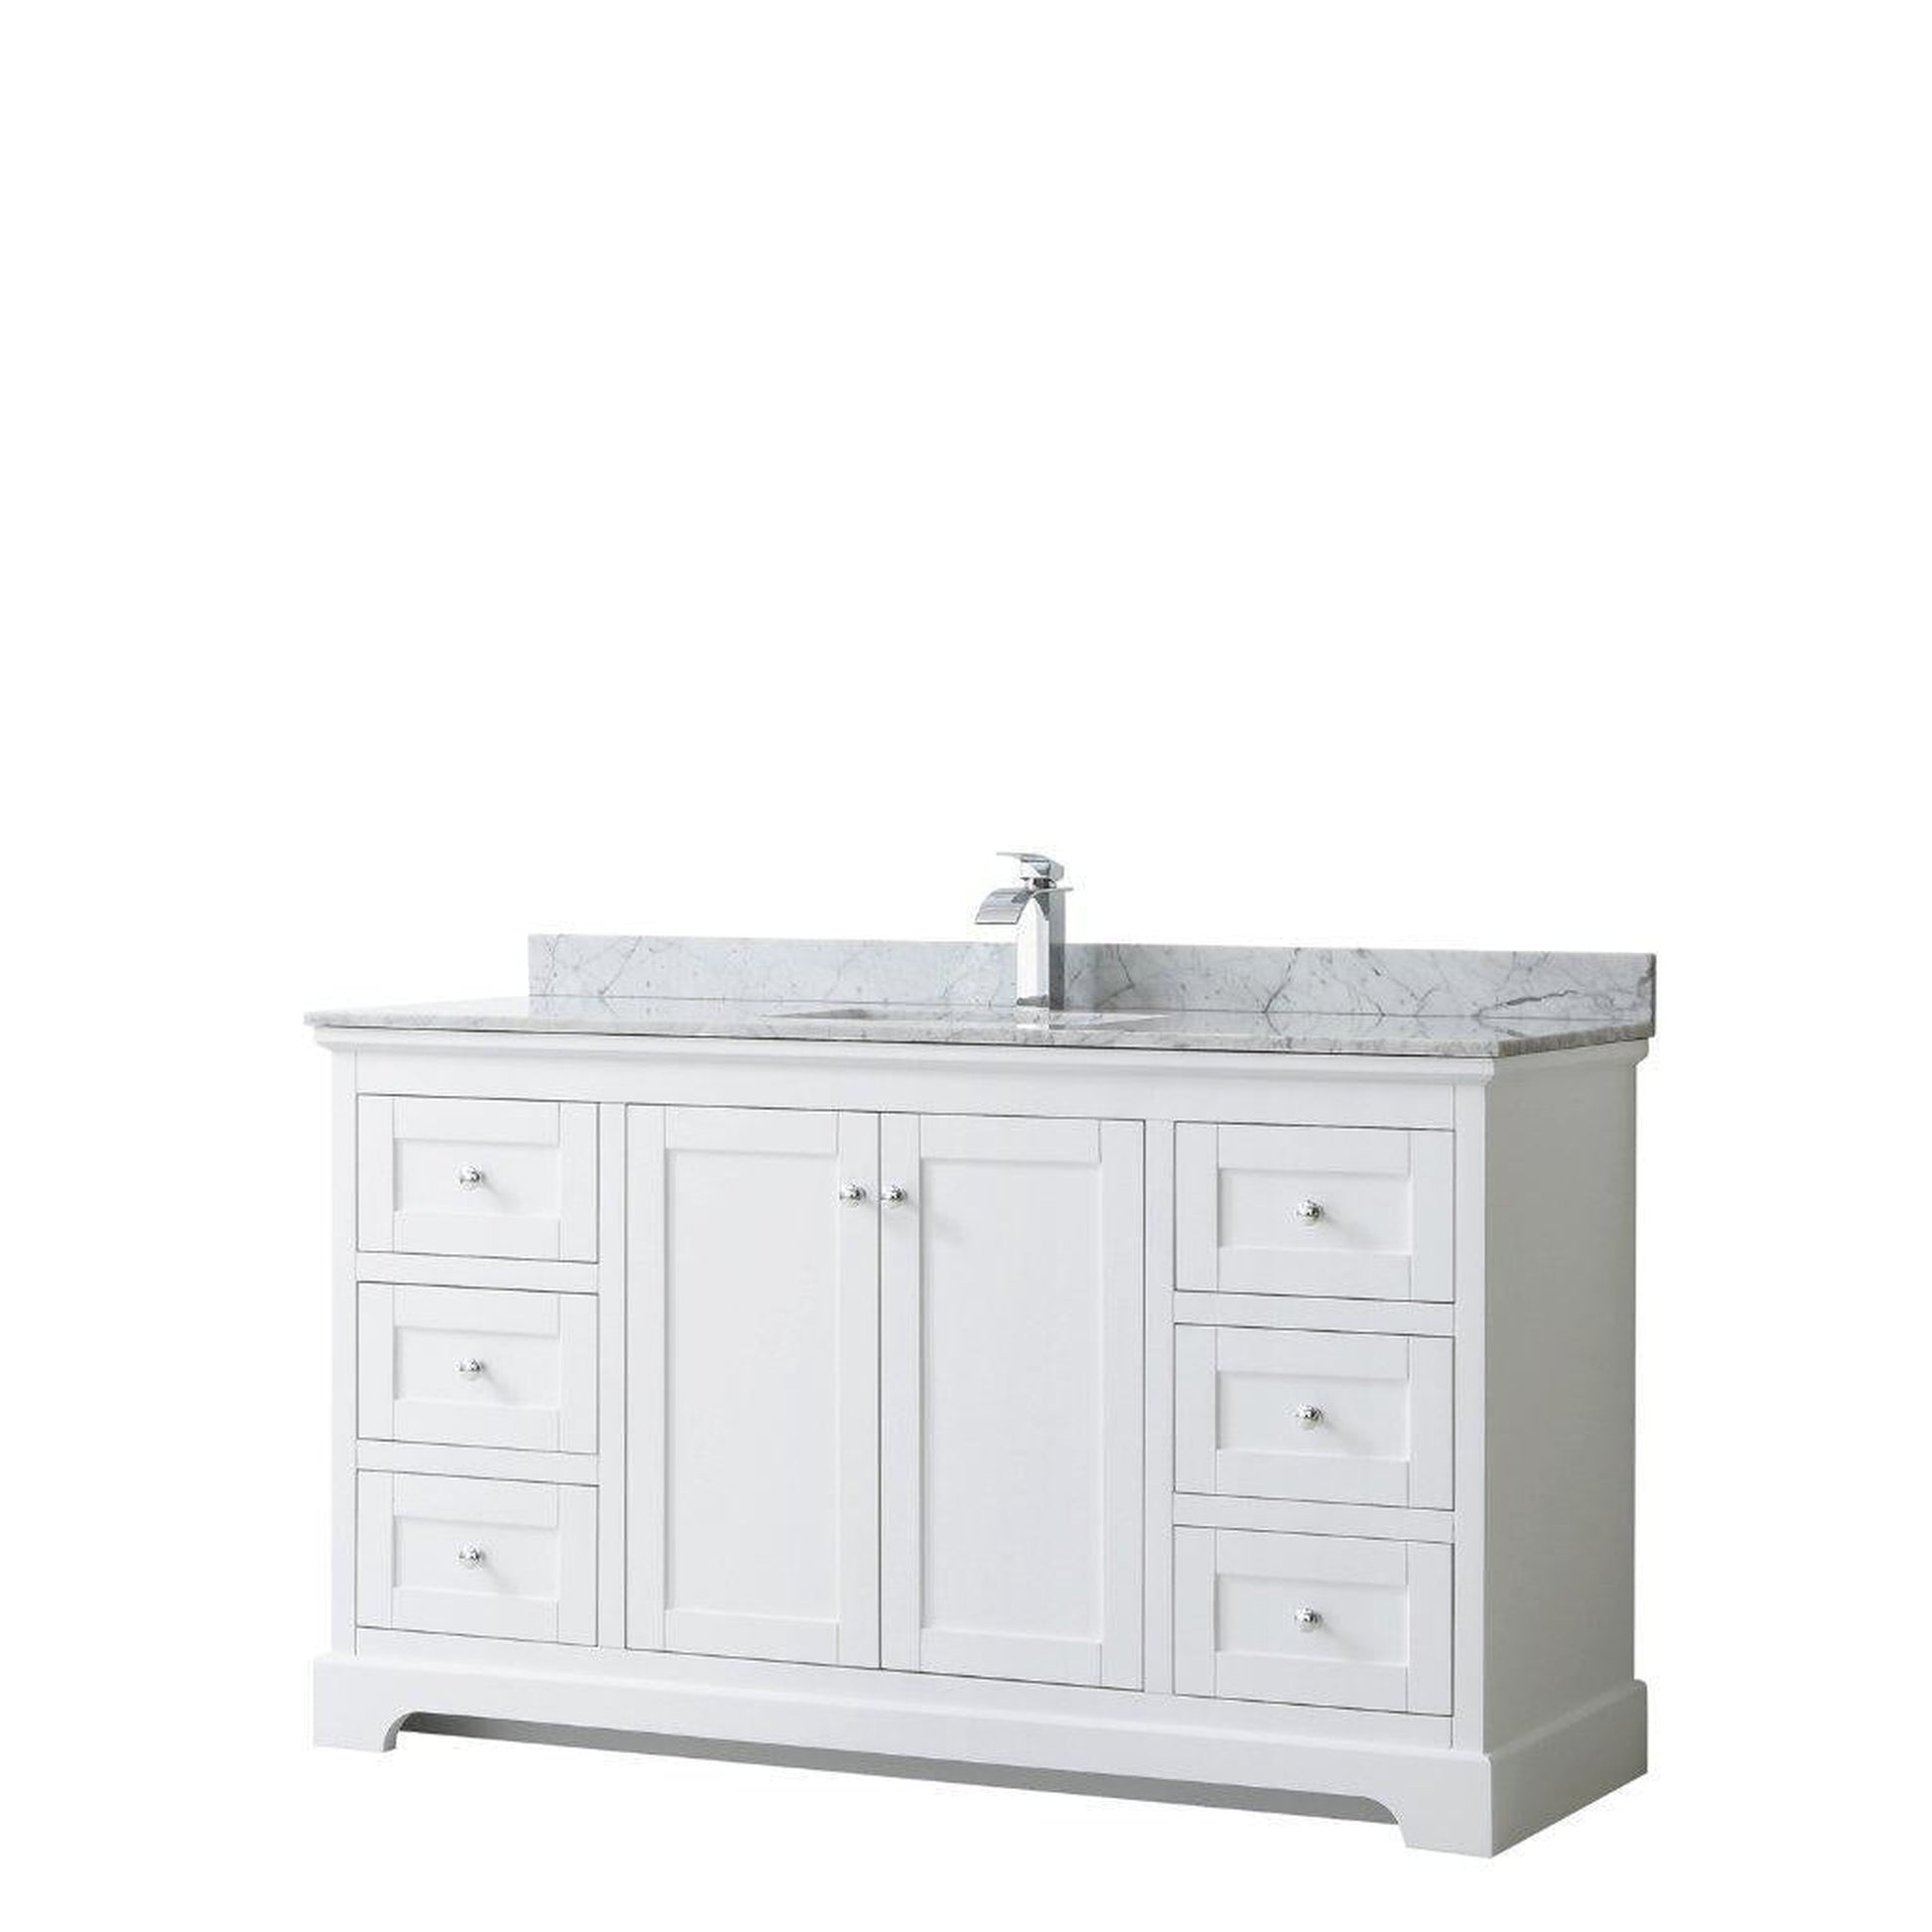 Wyndham Collection Avery 60" White Single Bathroom Vanity, White Carrara Marble Countertop With 1-Hole Faucet, Square Sink, Polished Chrome Trims